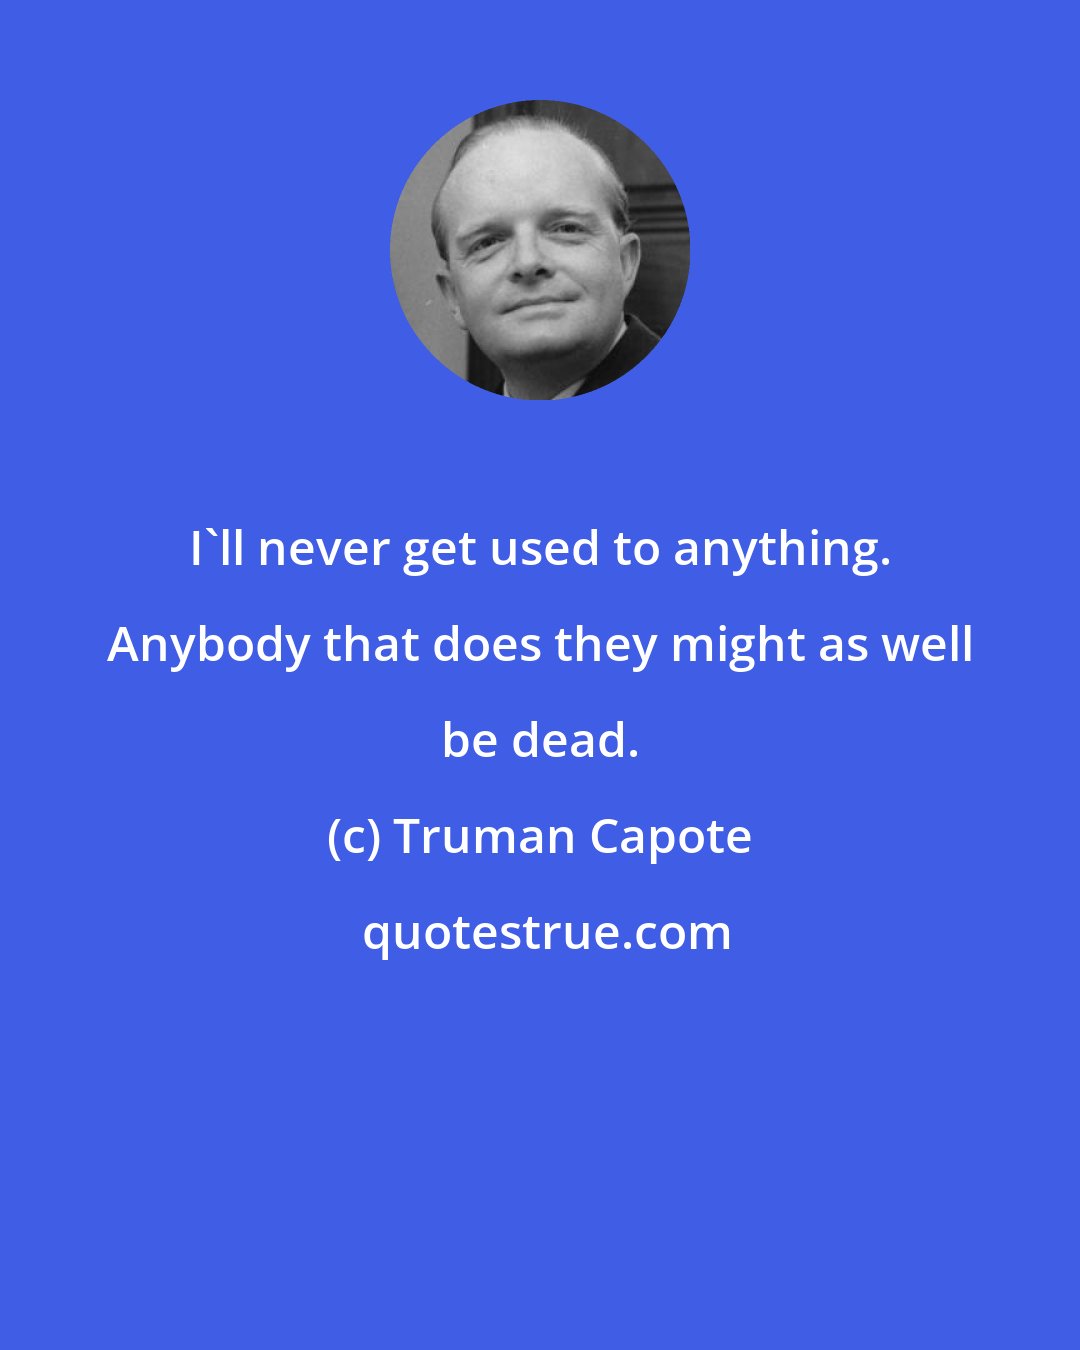 Truman Capote: I'll never get used to anything. Anybody that does they might as well be dead.